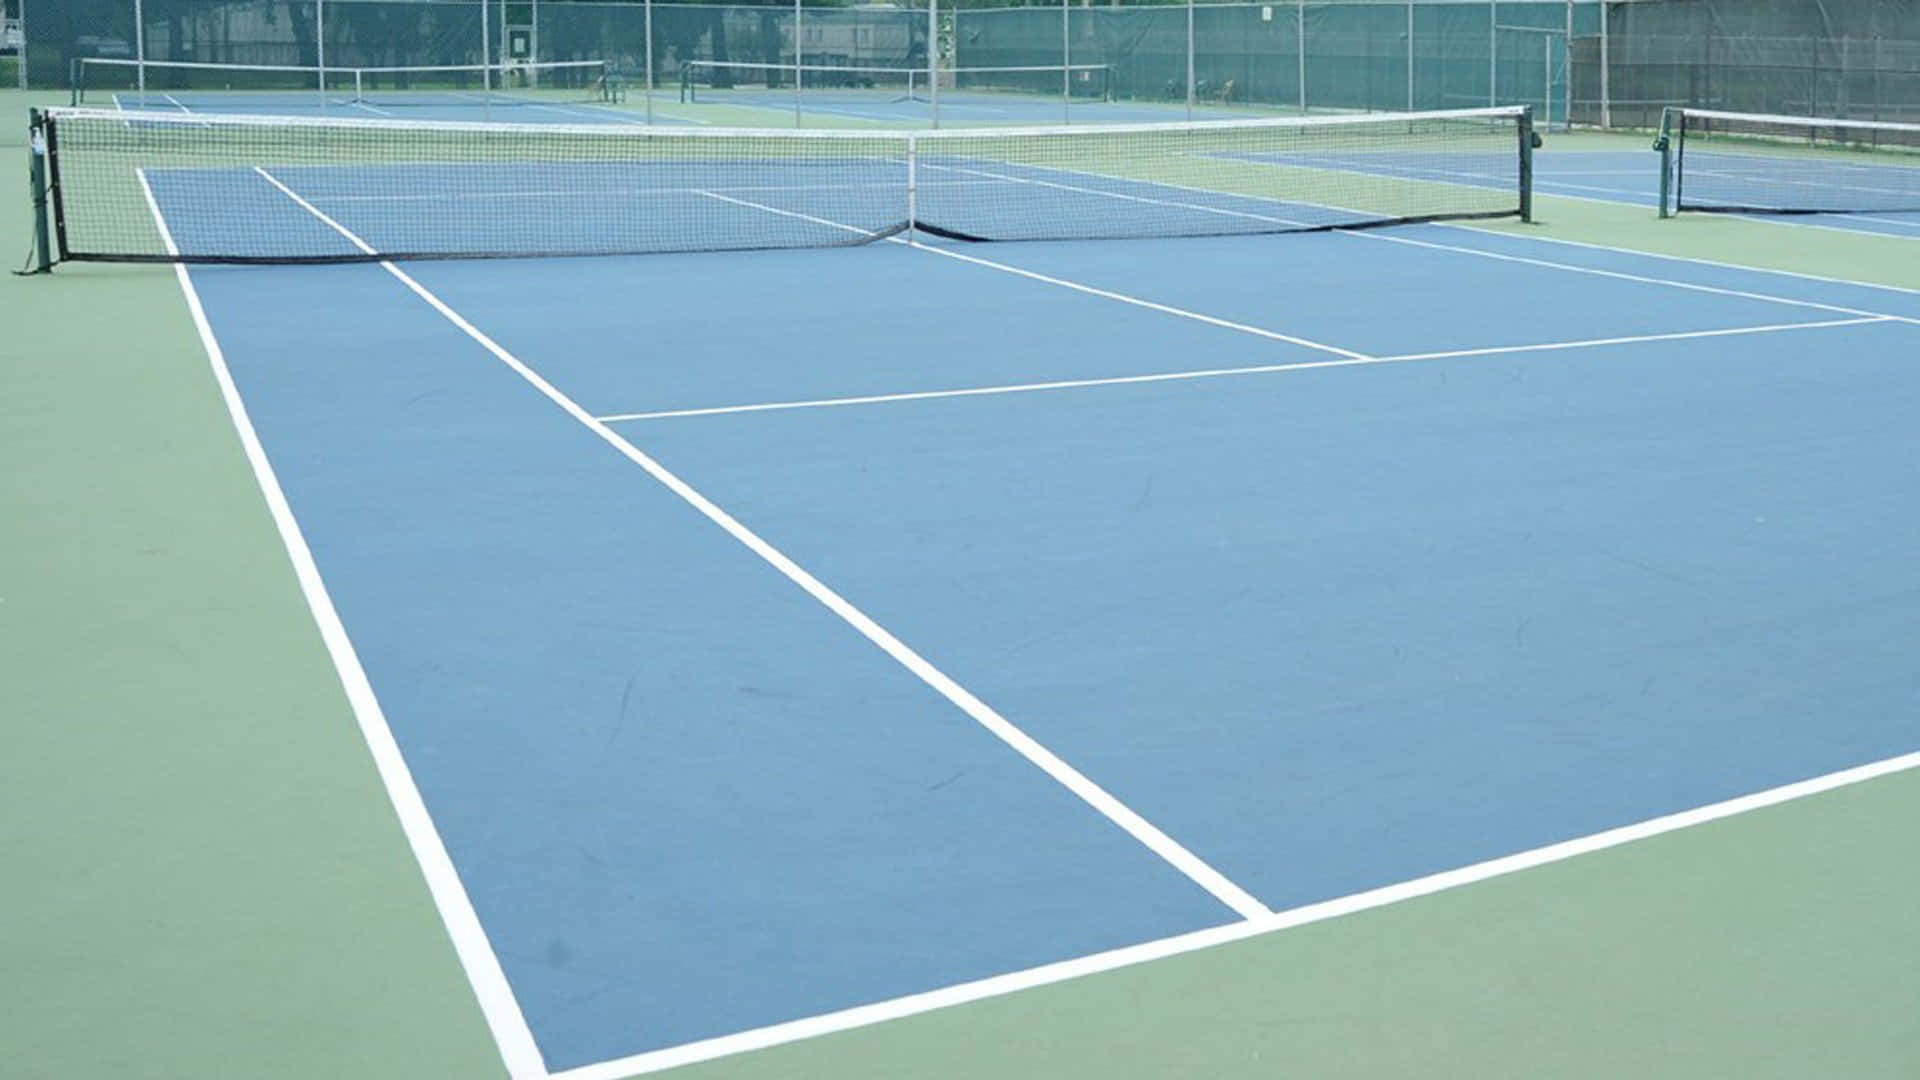 A Tennis Court With Blue Lines And White Lines